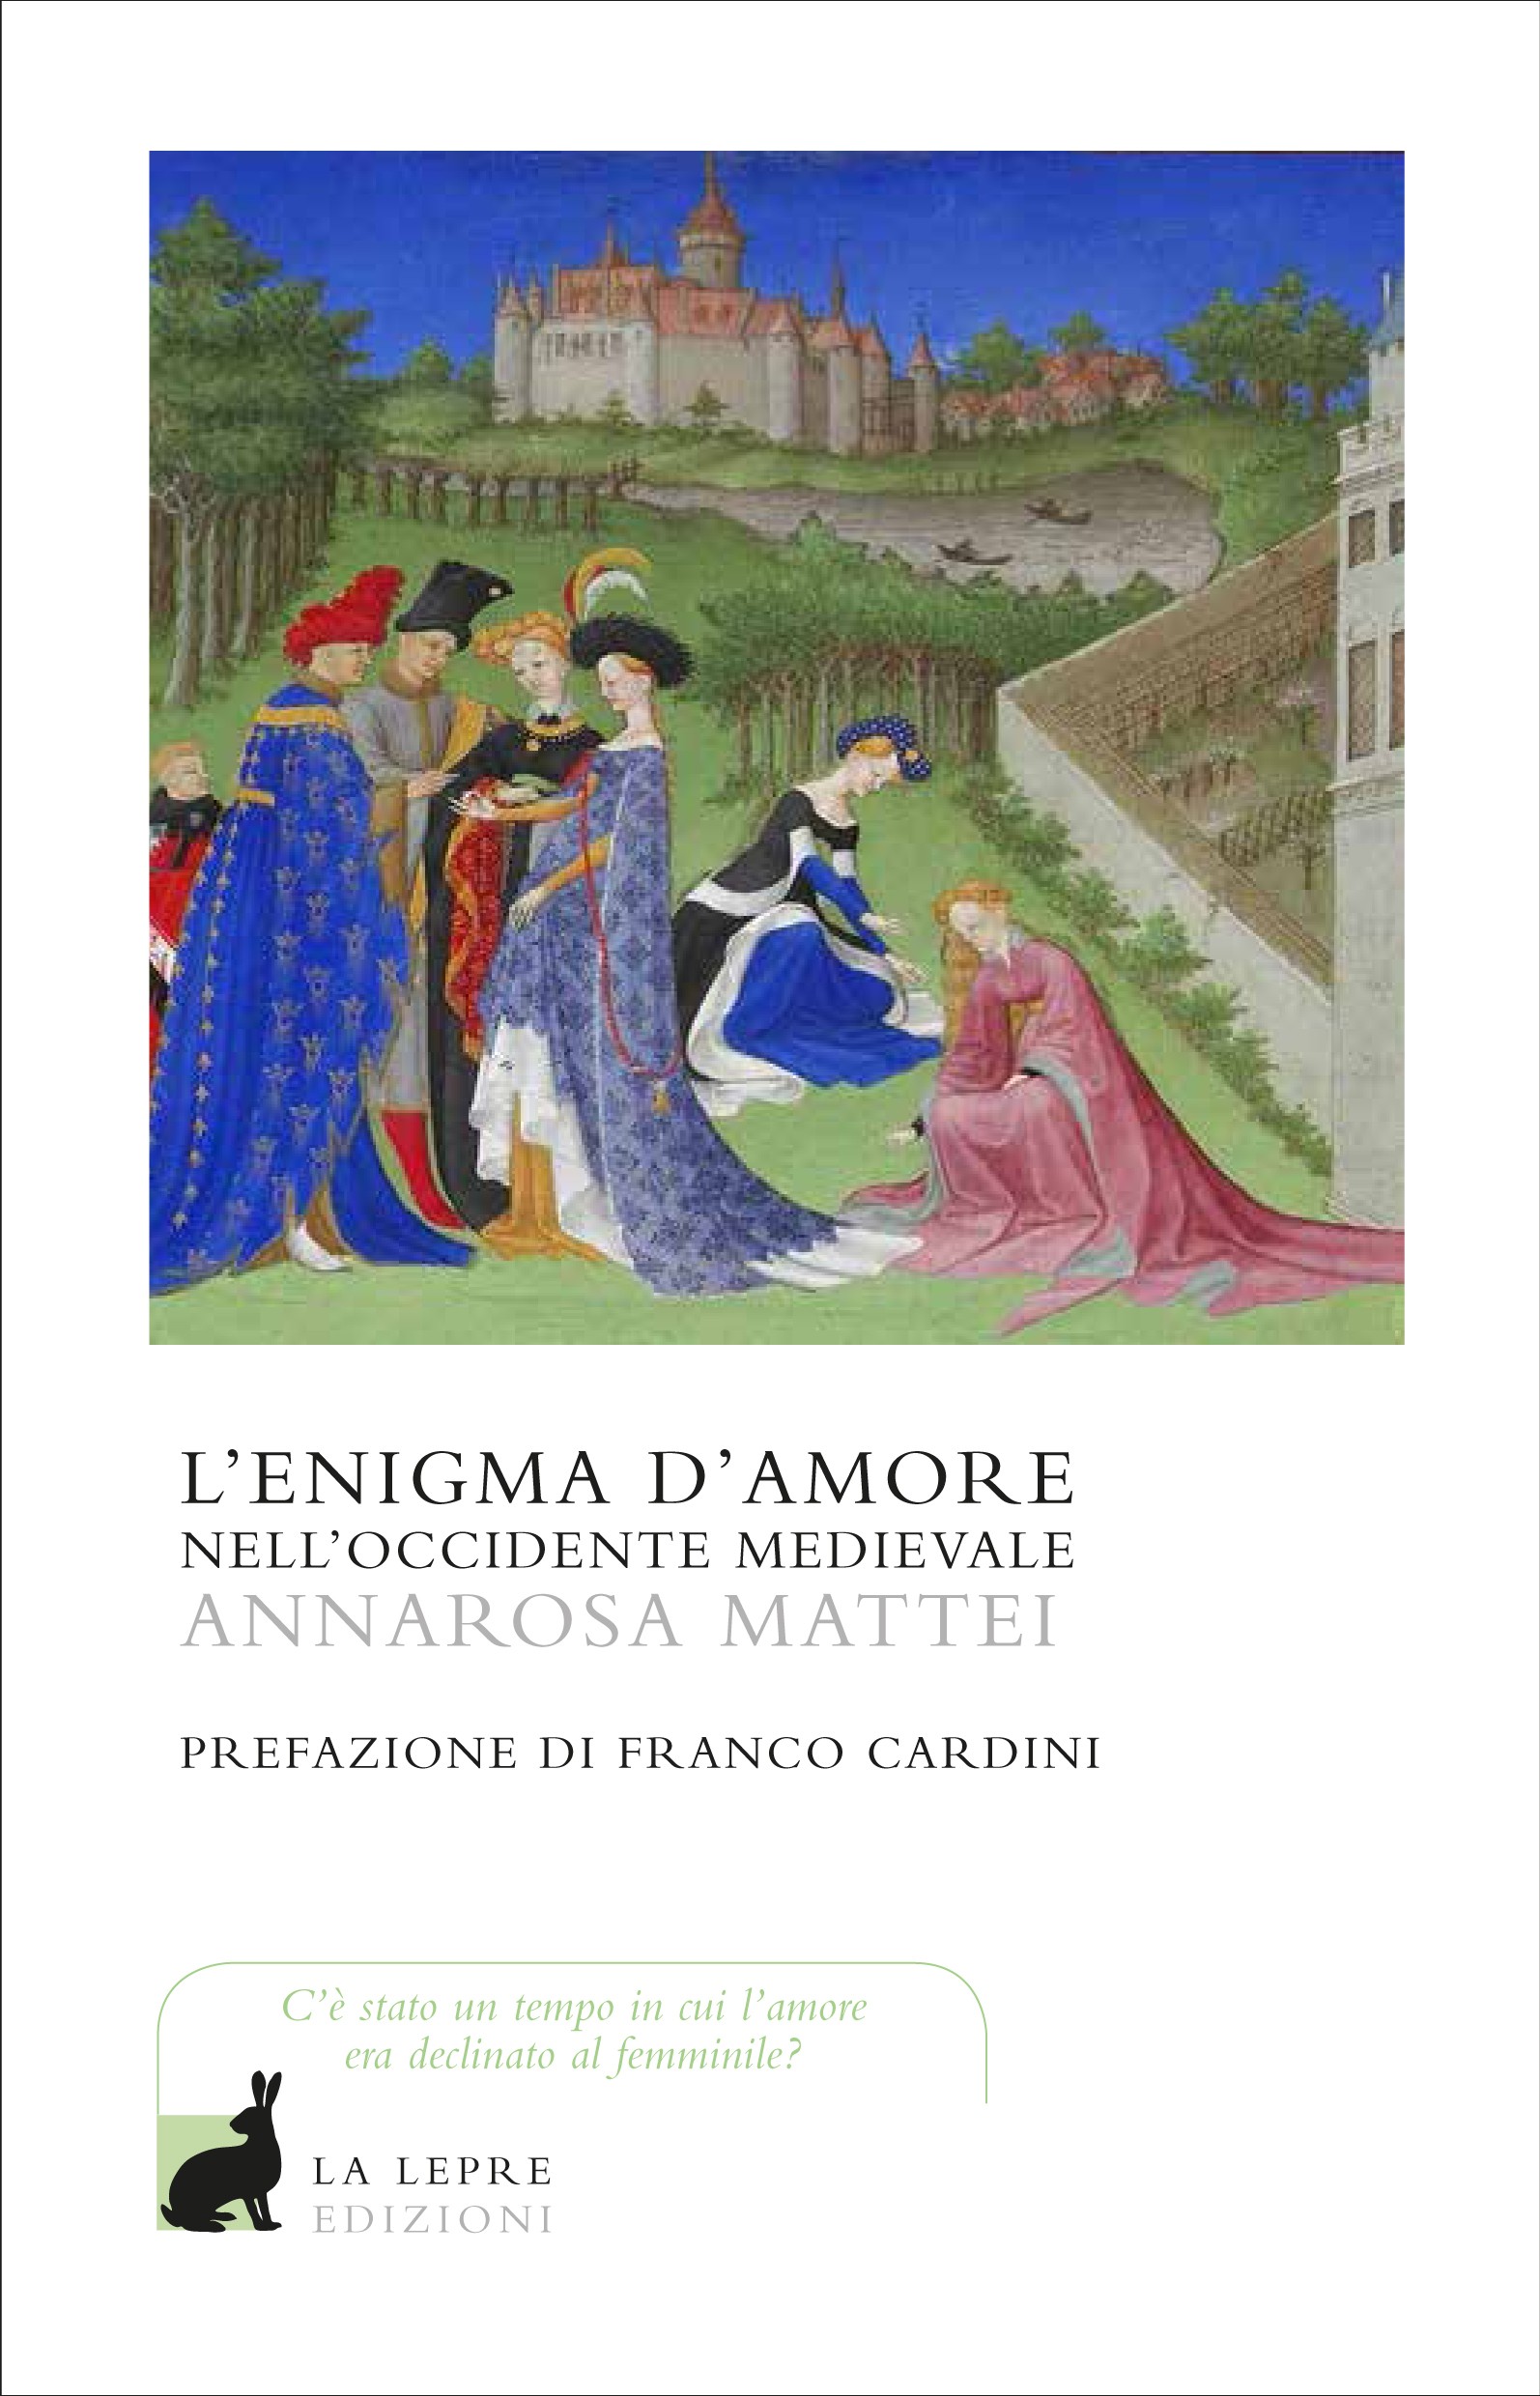 L'enigma d'amore nell'occidente medievale - Librerie.coop